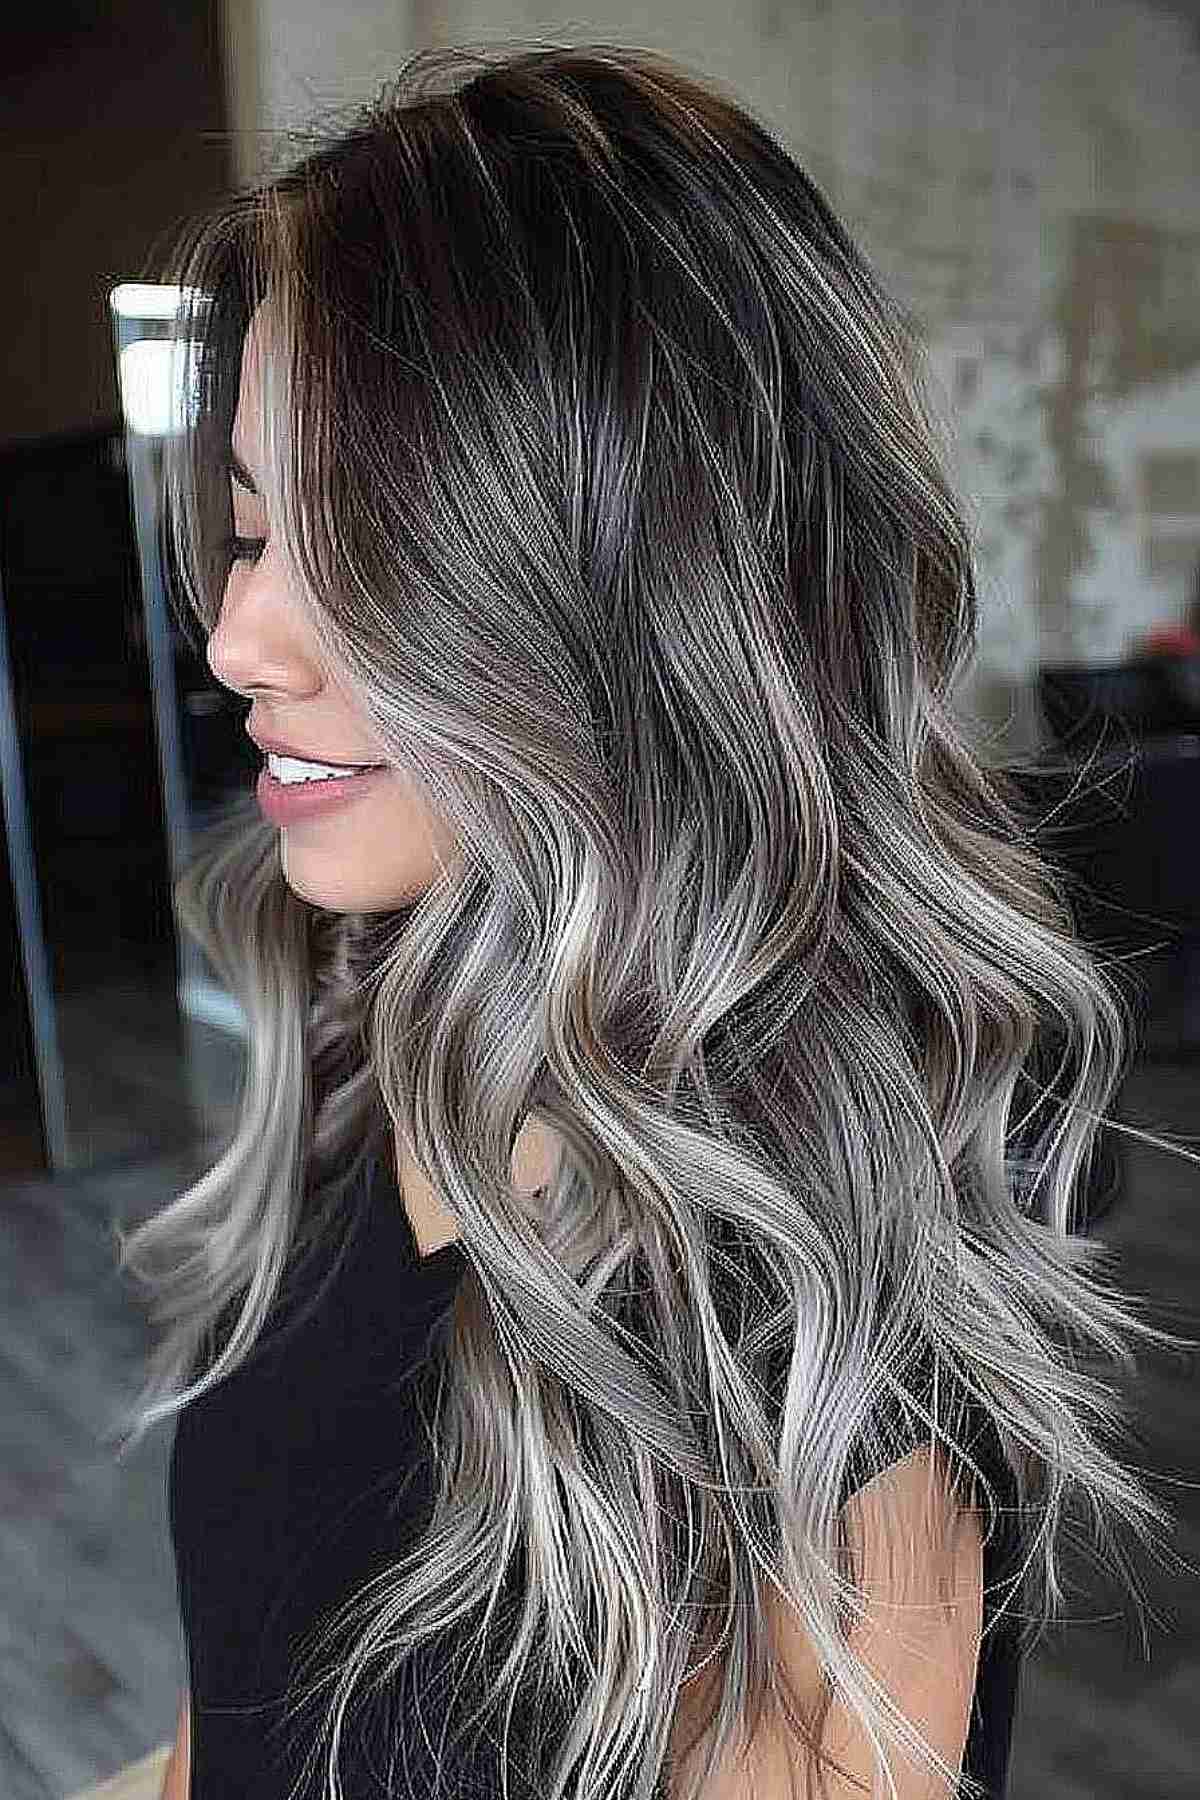 Long wavy hairstyle with a silver metallic gradient perfect for adding volume to dense hair